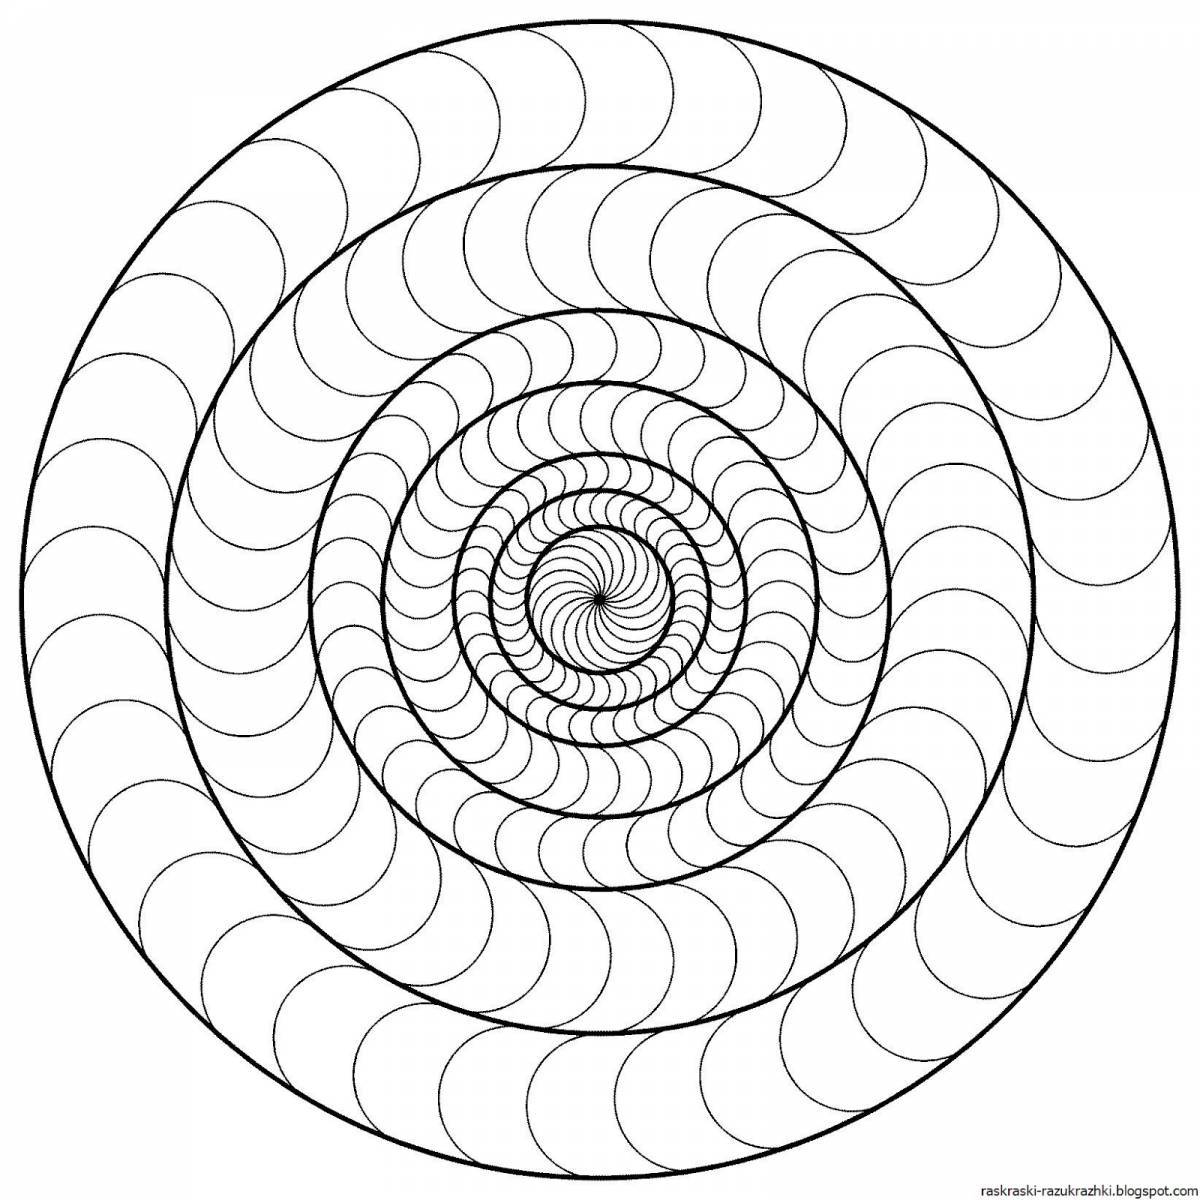 Intriguing spiral pattern coloring page